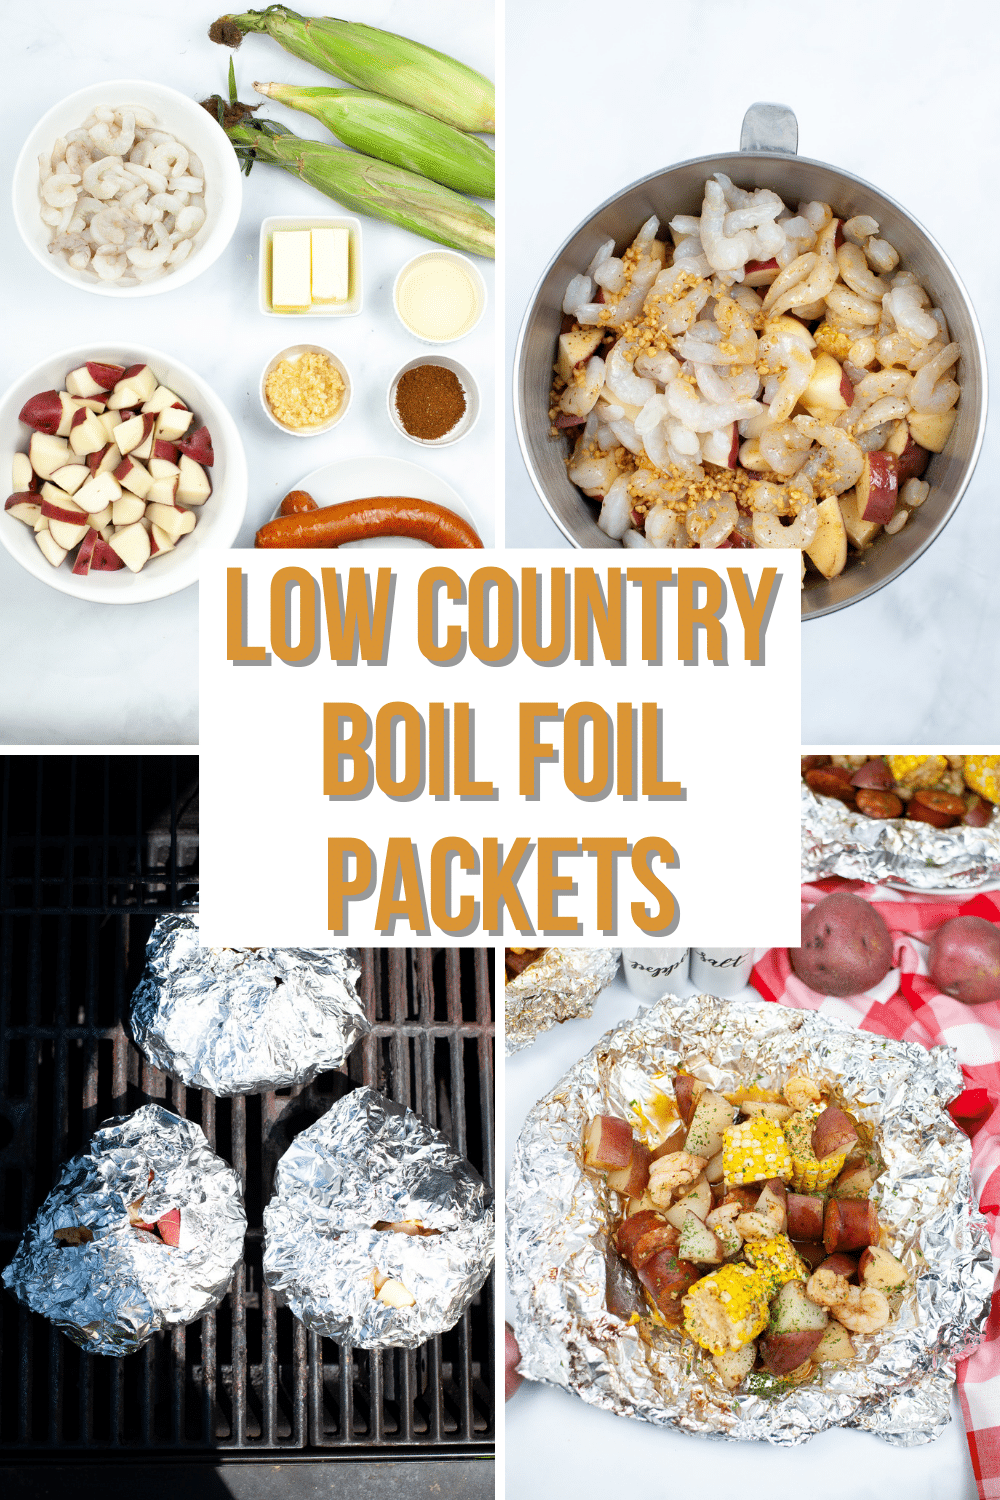 These Low Country Boil Foil Packets are a simplified version of the classic Southern dish, cooked all in one packet, making cleanup a breeze. #lowcountryboil #foilpackets #southerndish #dinner #recipe via @wondermomwannab